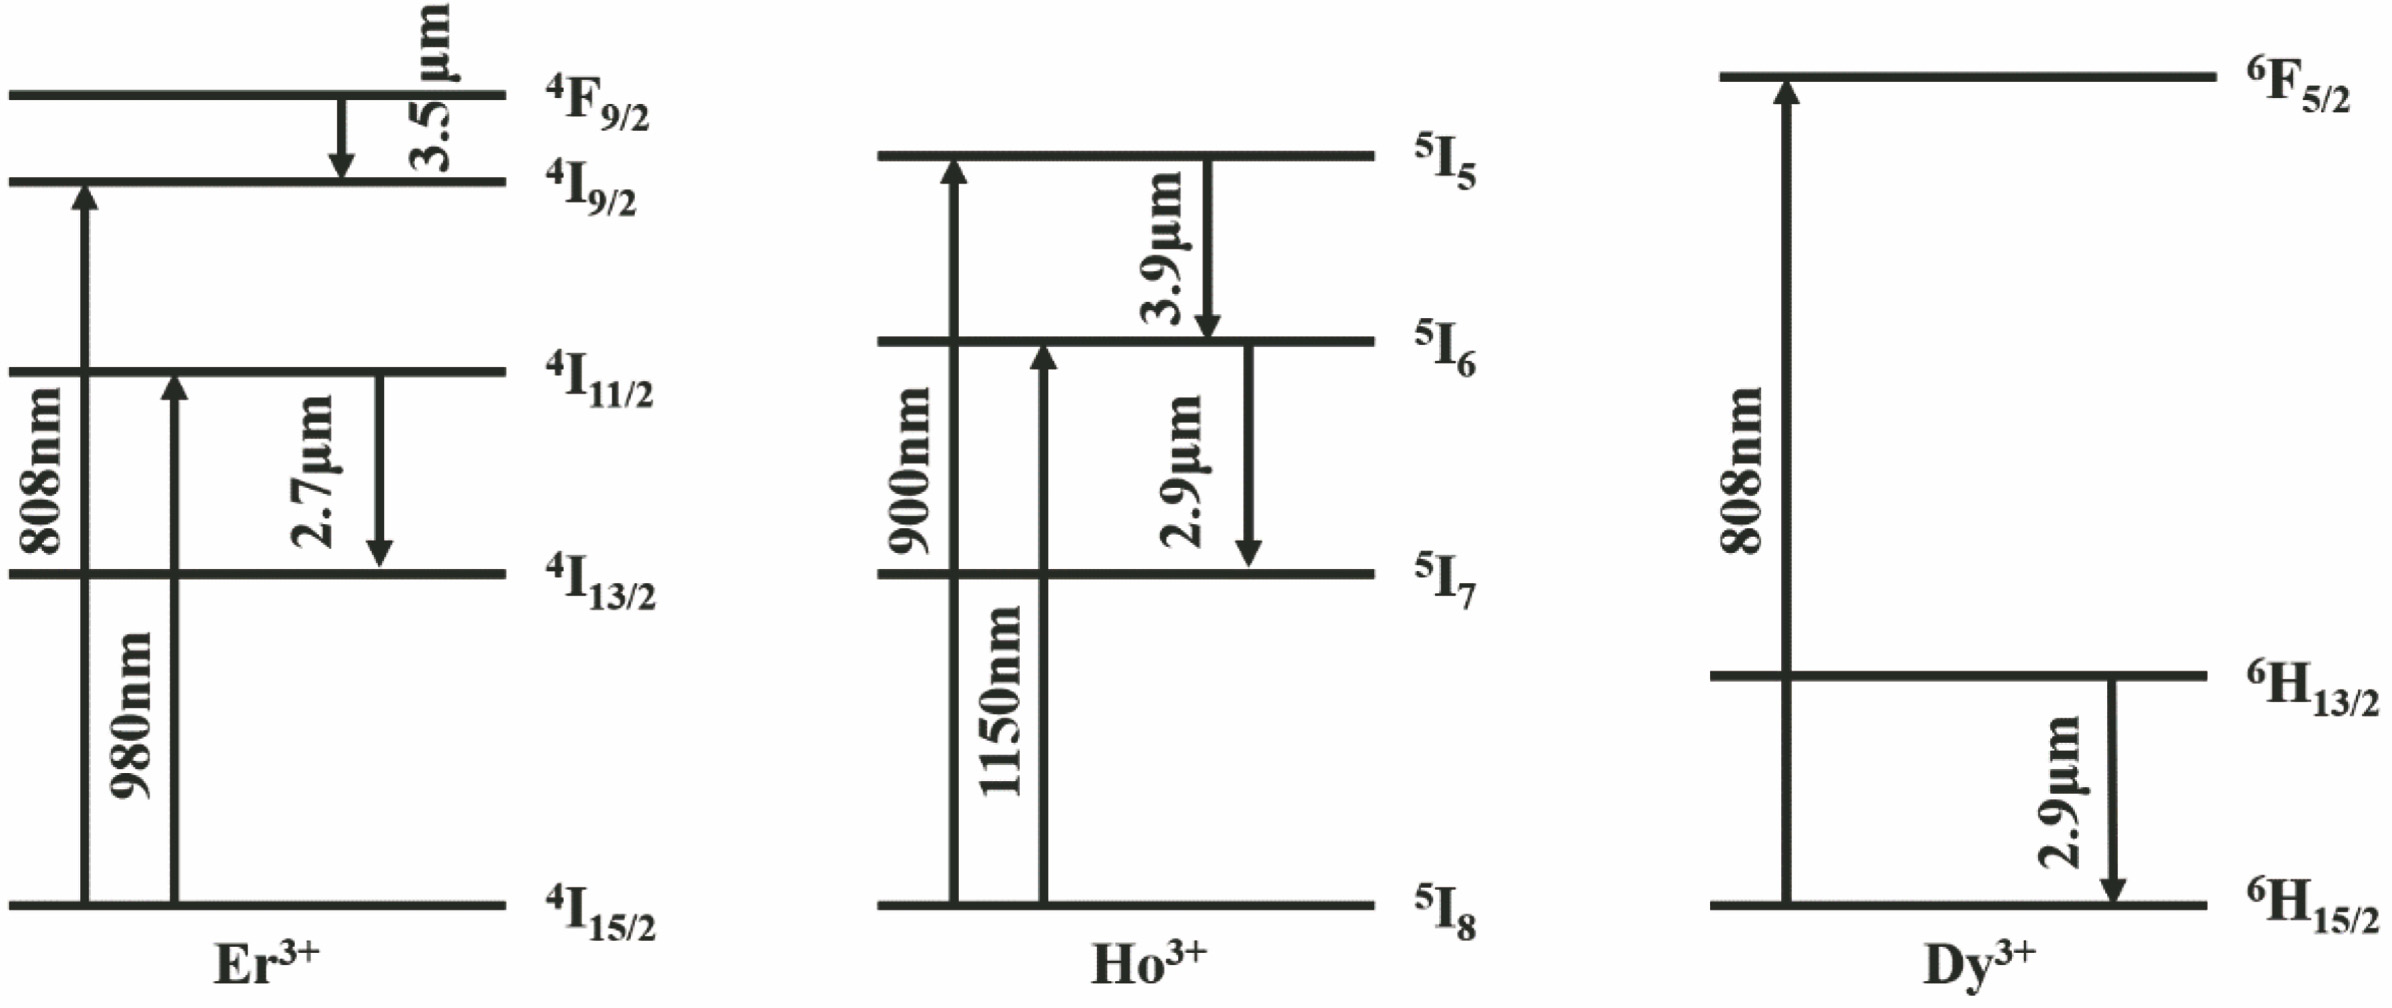 Schematic diagrams of energy level transition of mid-infrared rare-earth-doped ions[26]